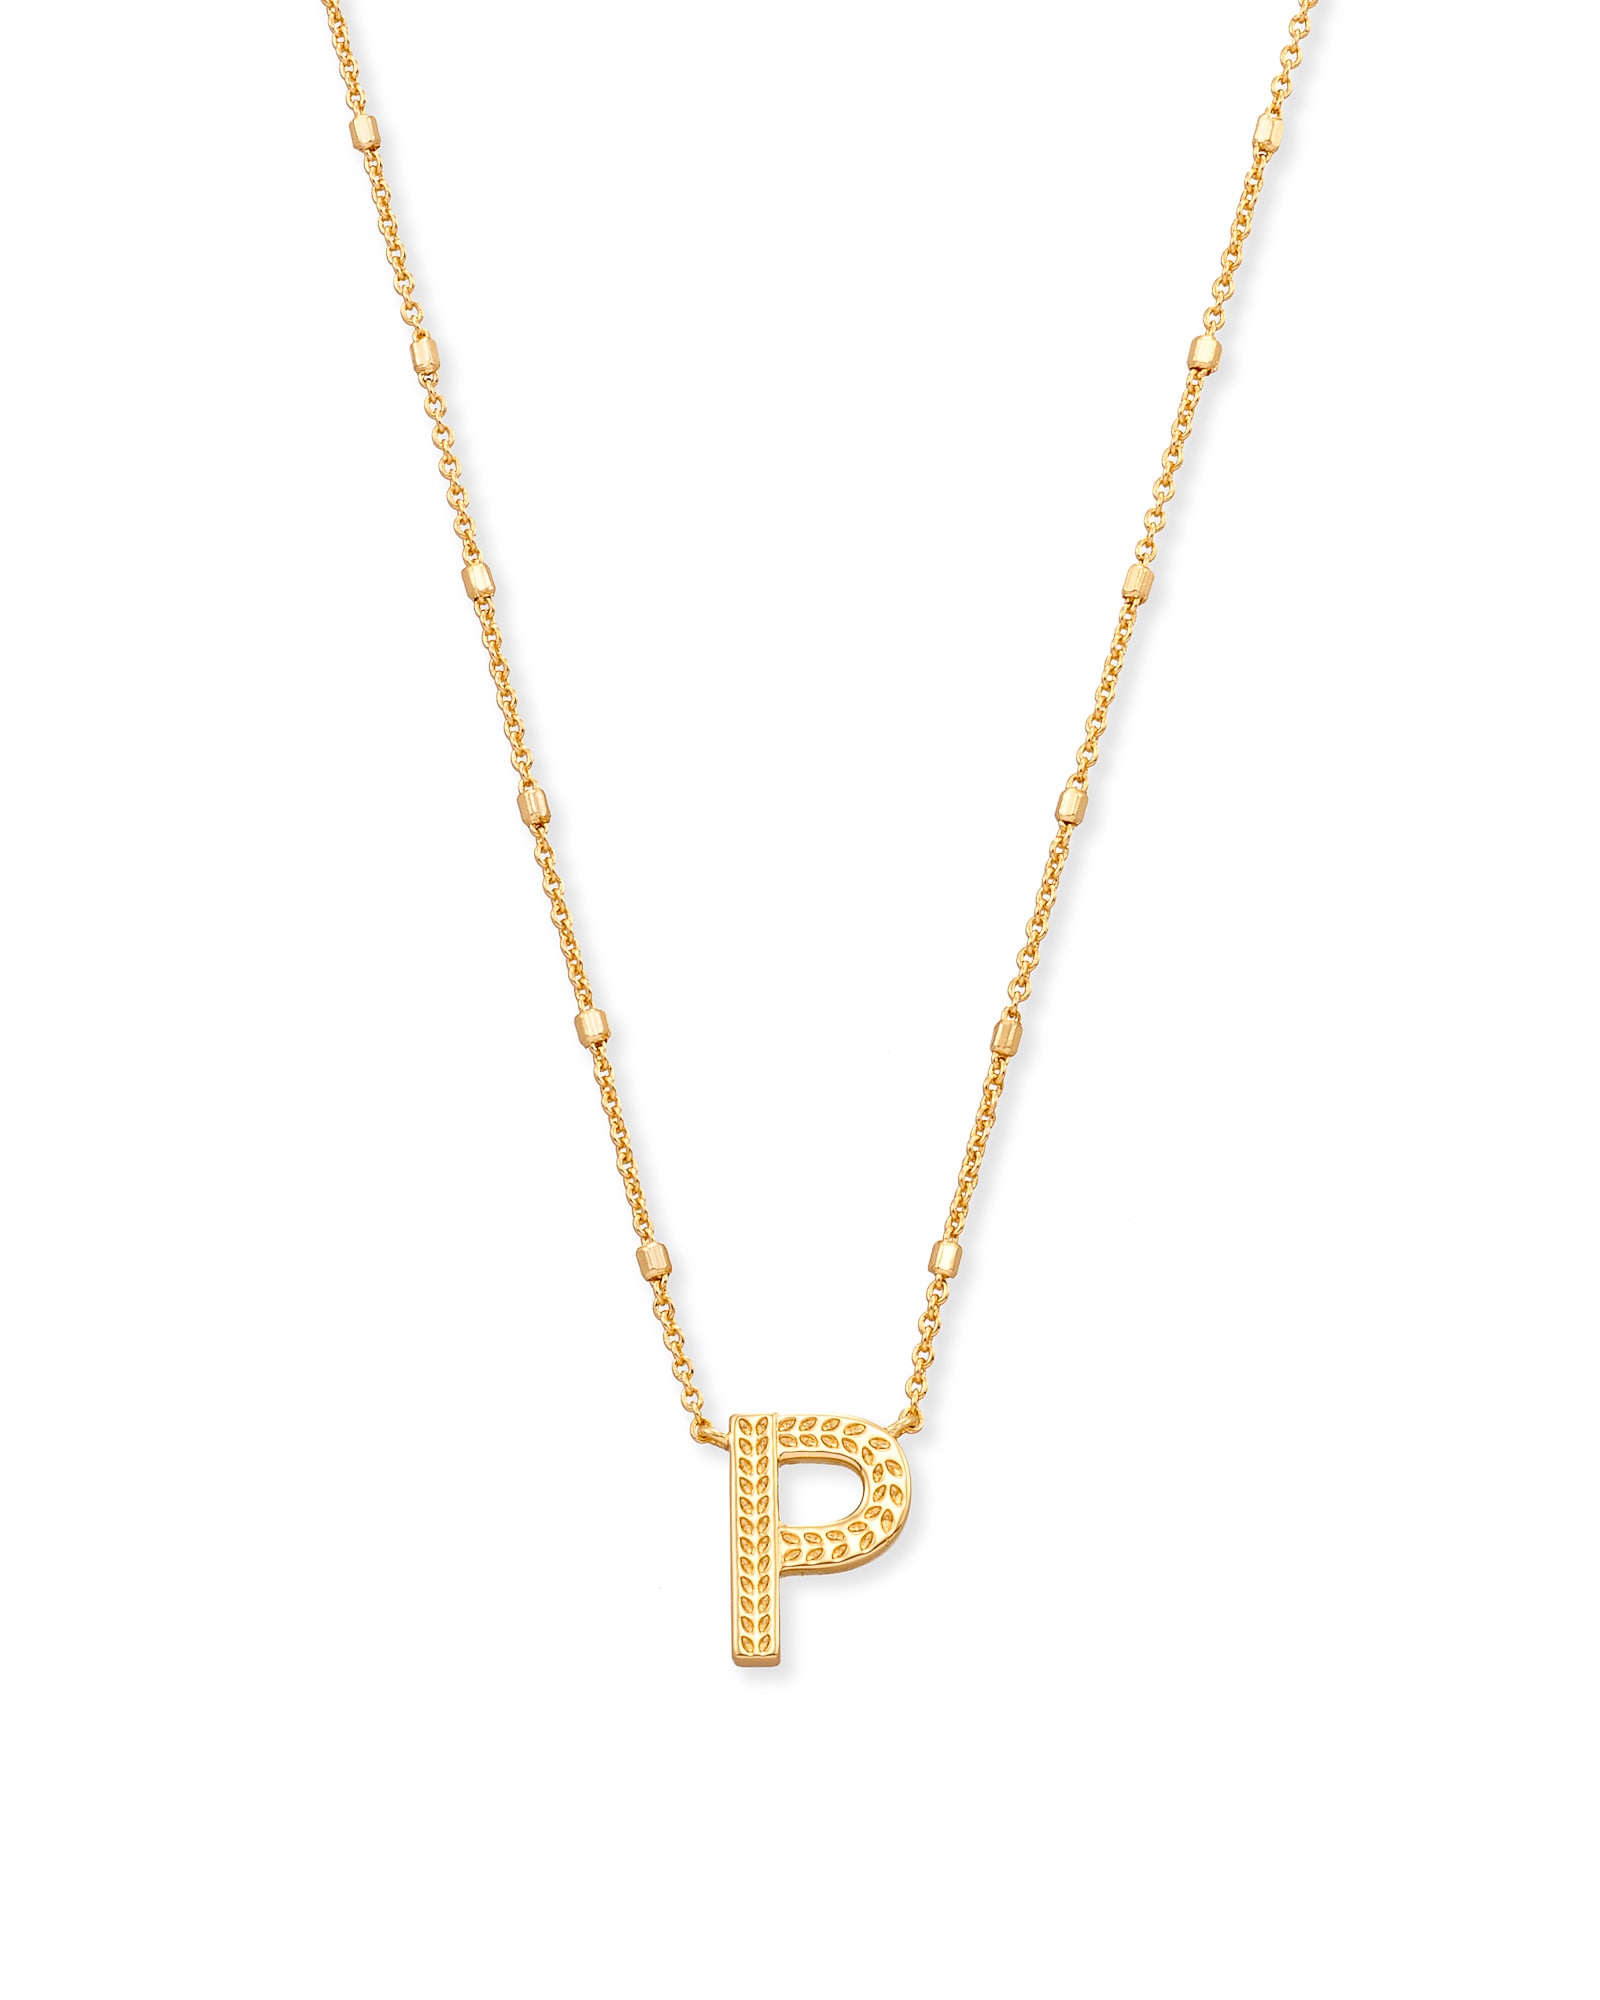 Kendra Scott Letter P Pendant Necklace in Gold | Plated Brass